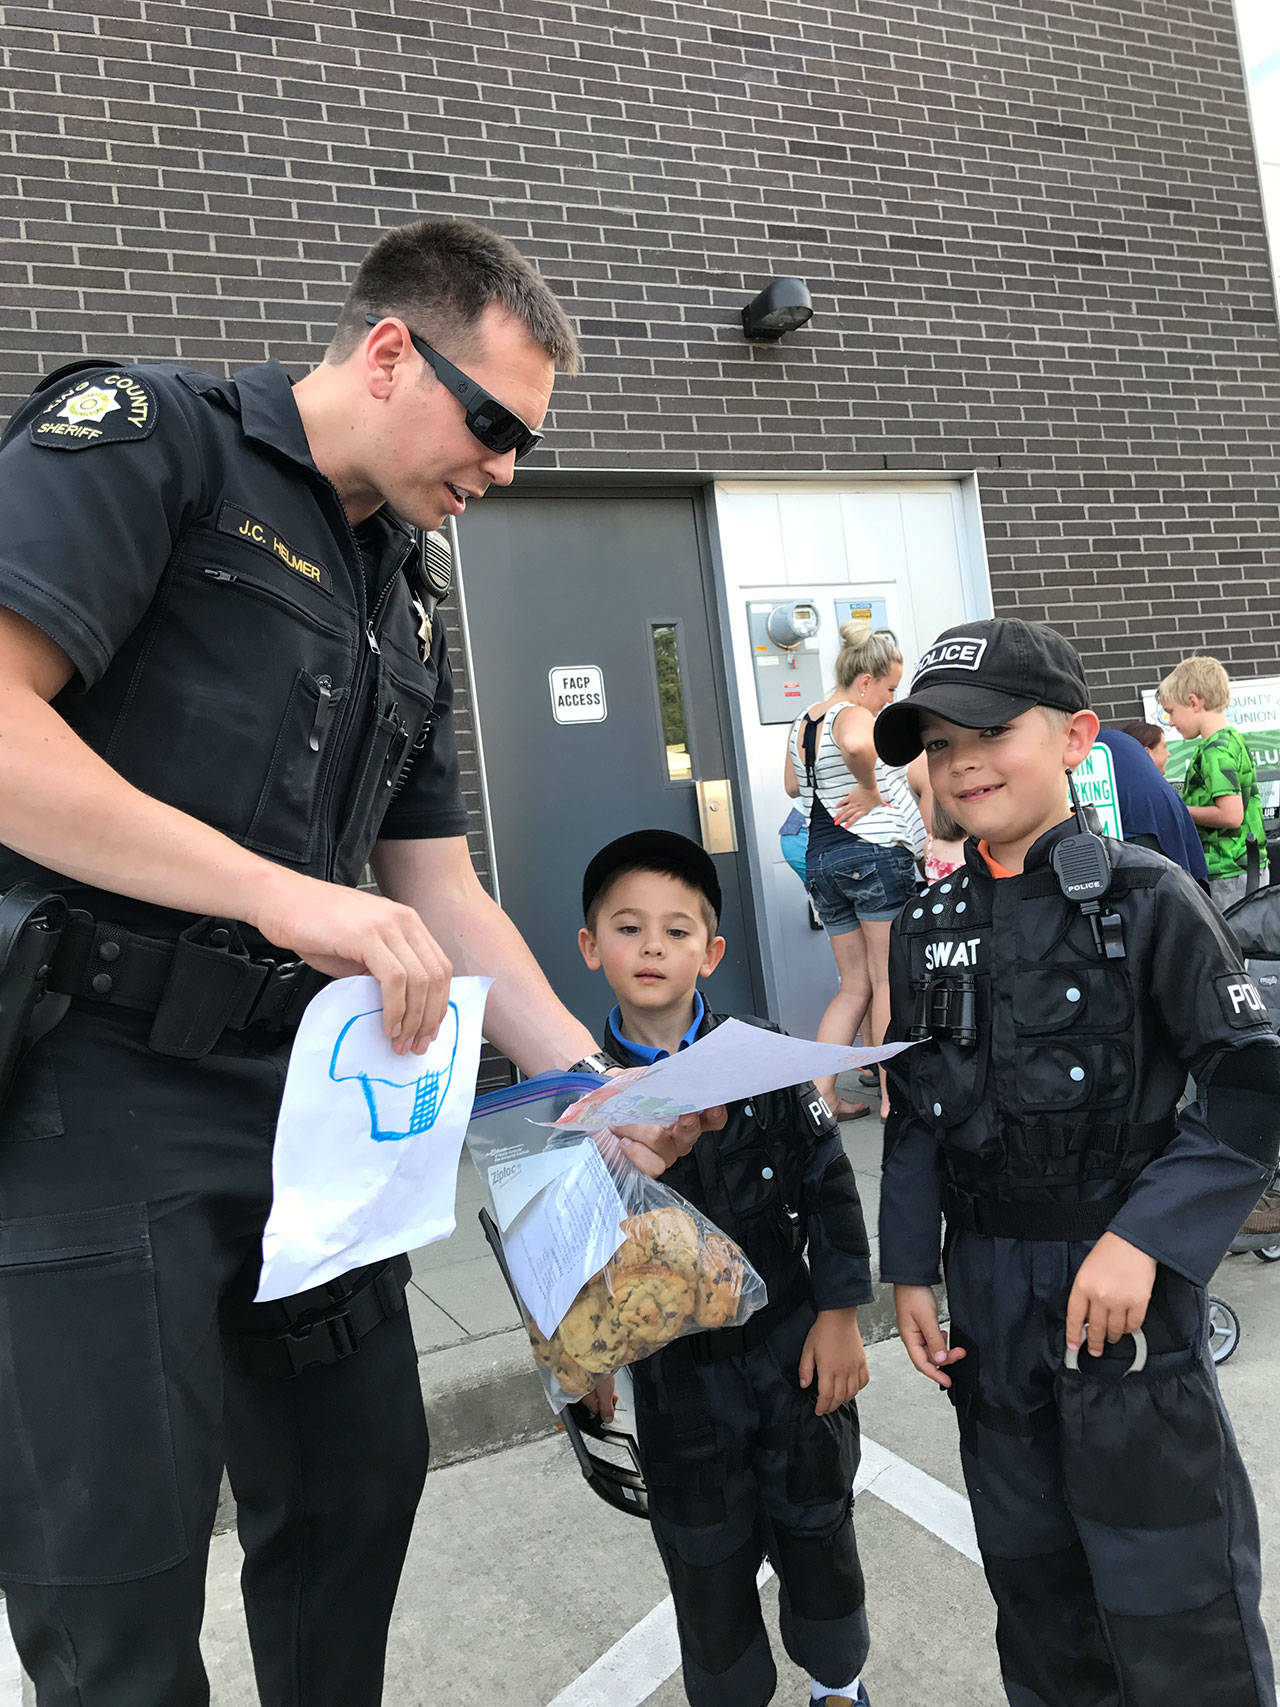 King County deputy Jeff Helmer (left) admires drawings from brothers Sam Chapman, 5, and Gabe Chapman, 8 of Woodinville. Samantha Pak, Bothell-Kenmore Reporter